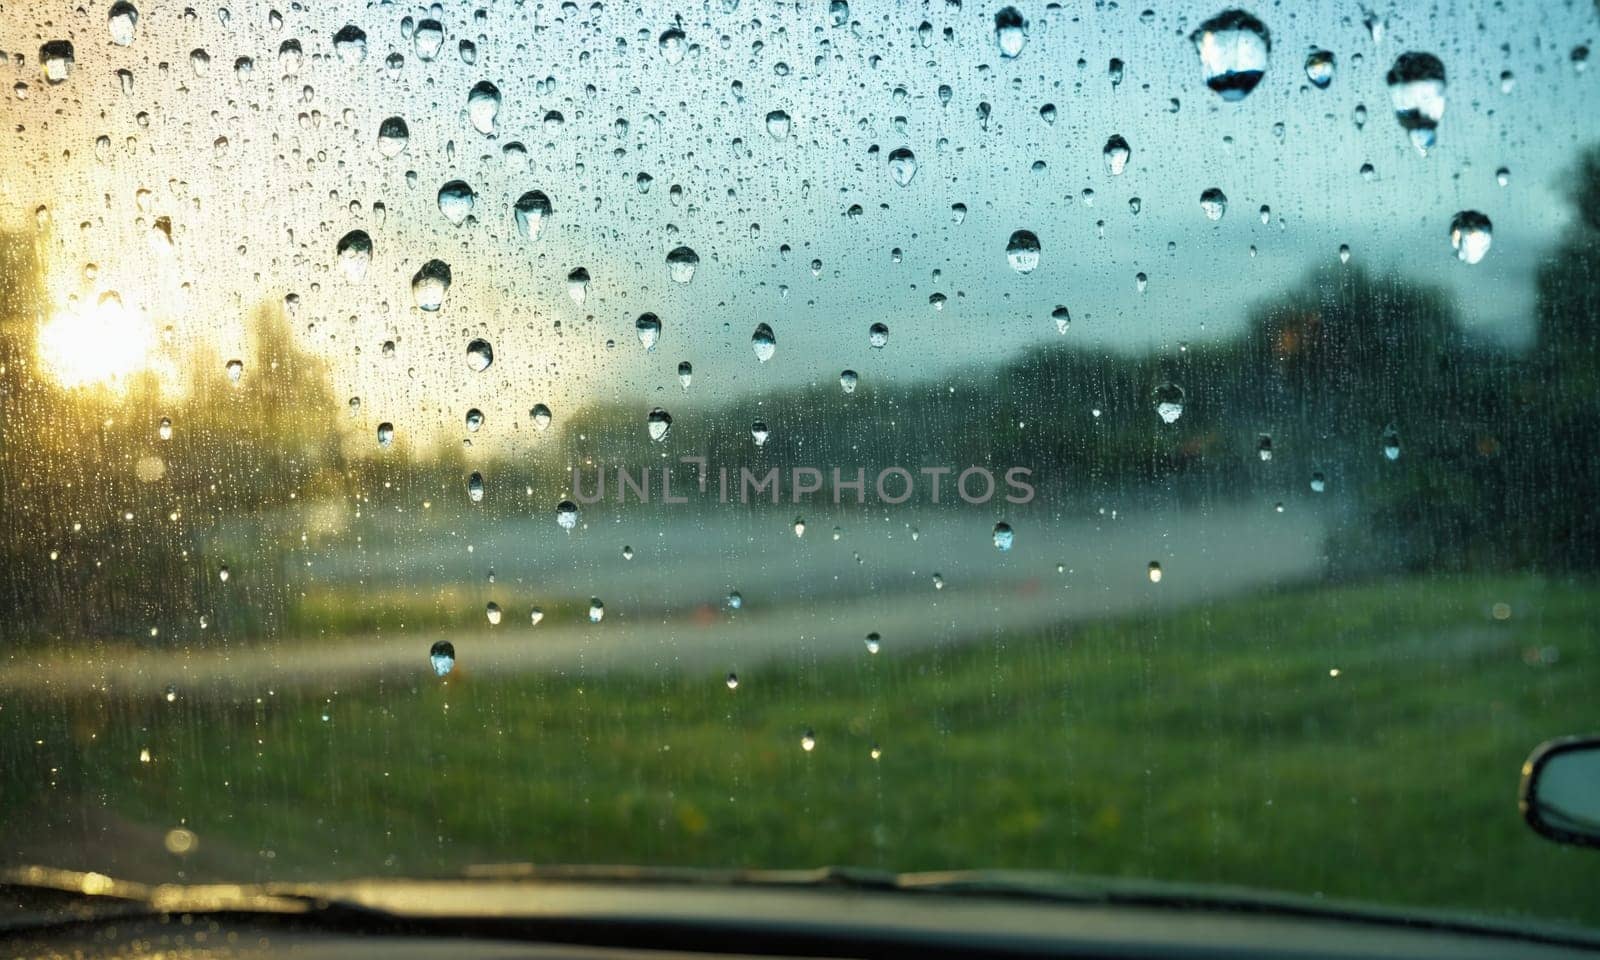 Driving on a rainy day through the windshield of a car